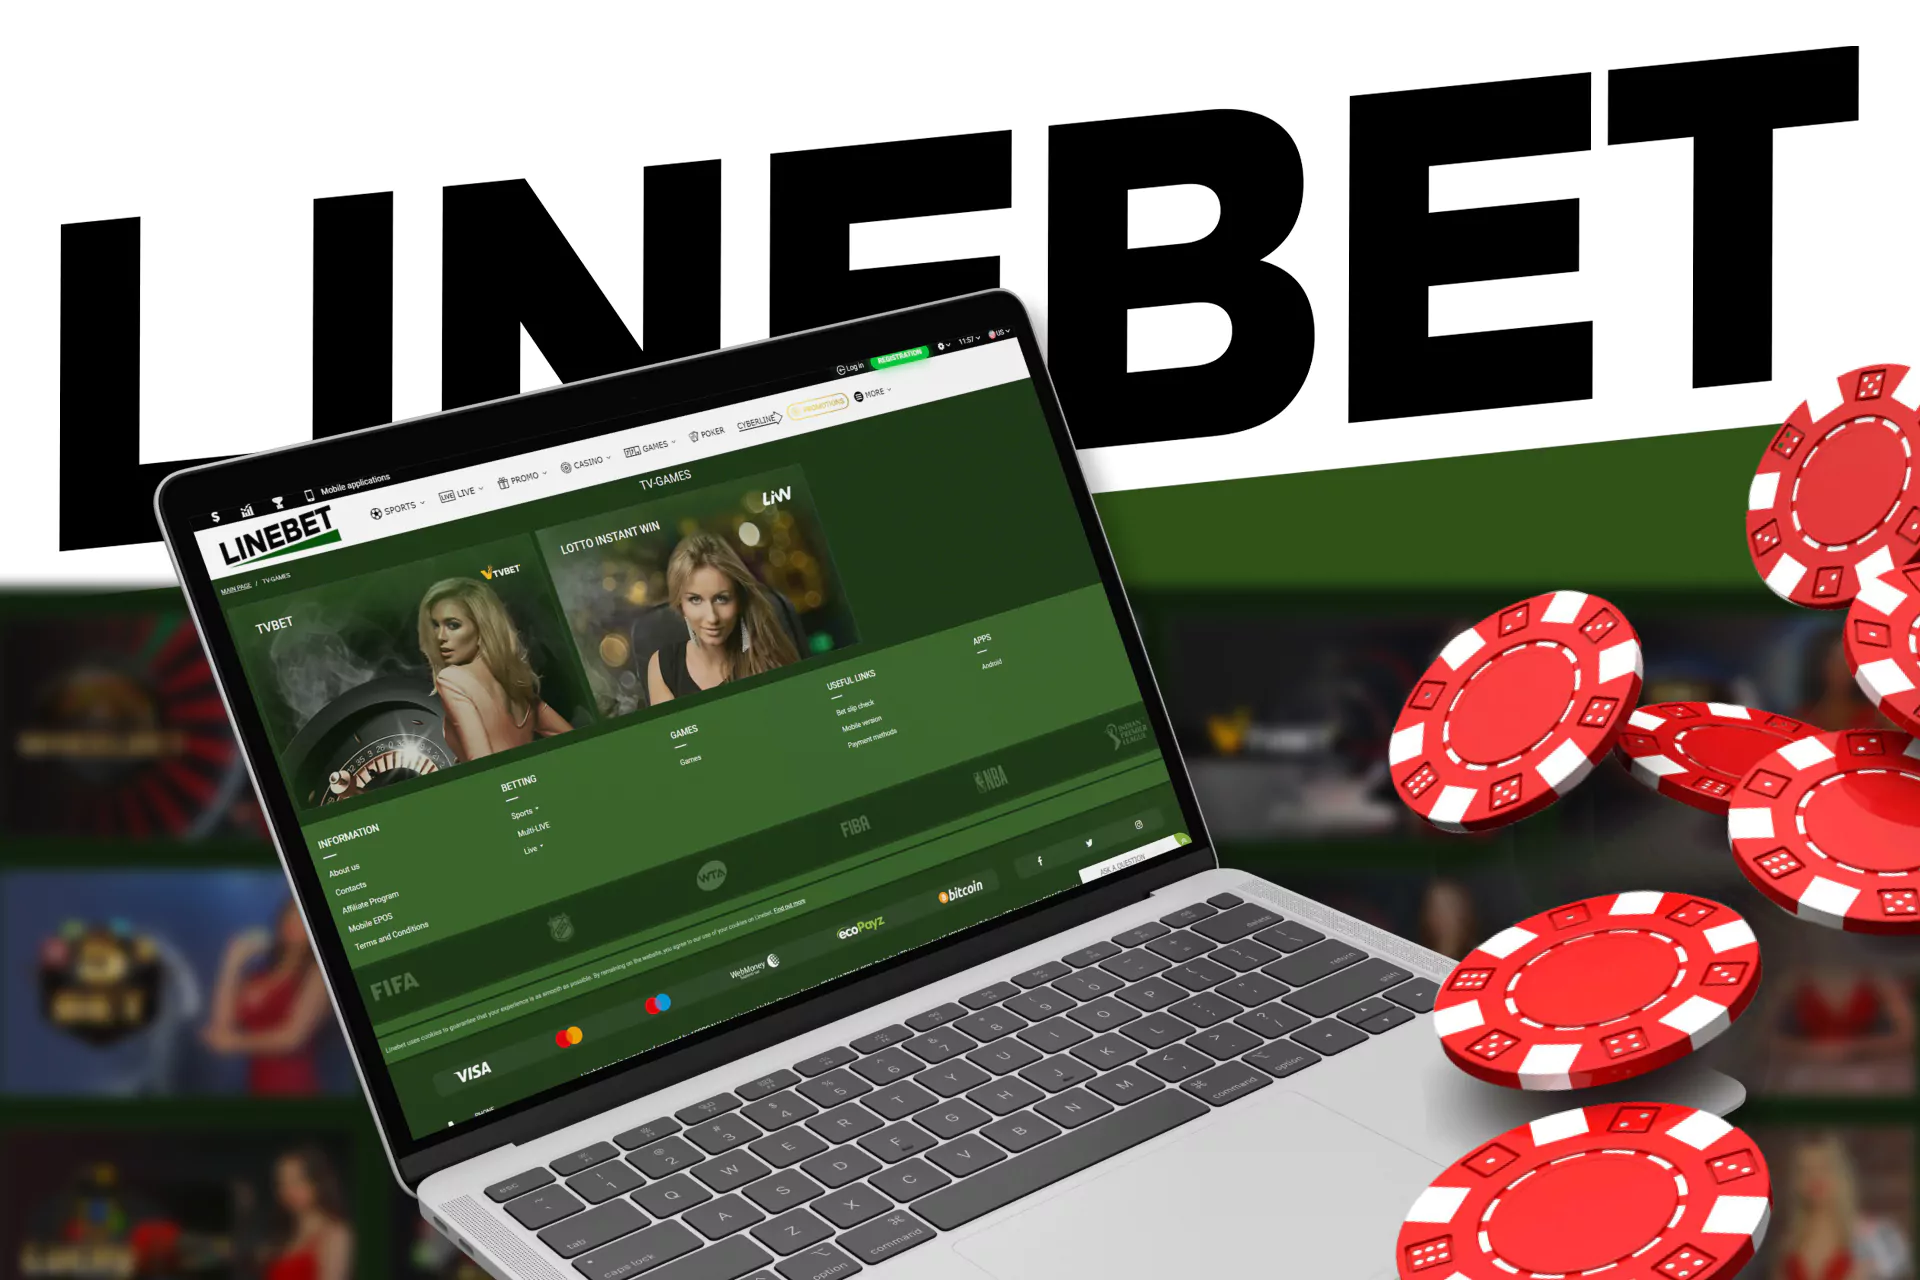 In the TV games from Linebet you can try a lot of different entertainment.